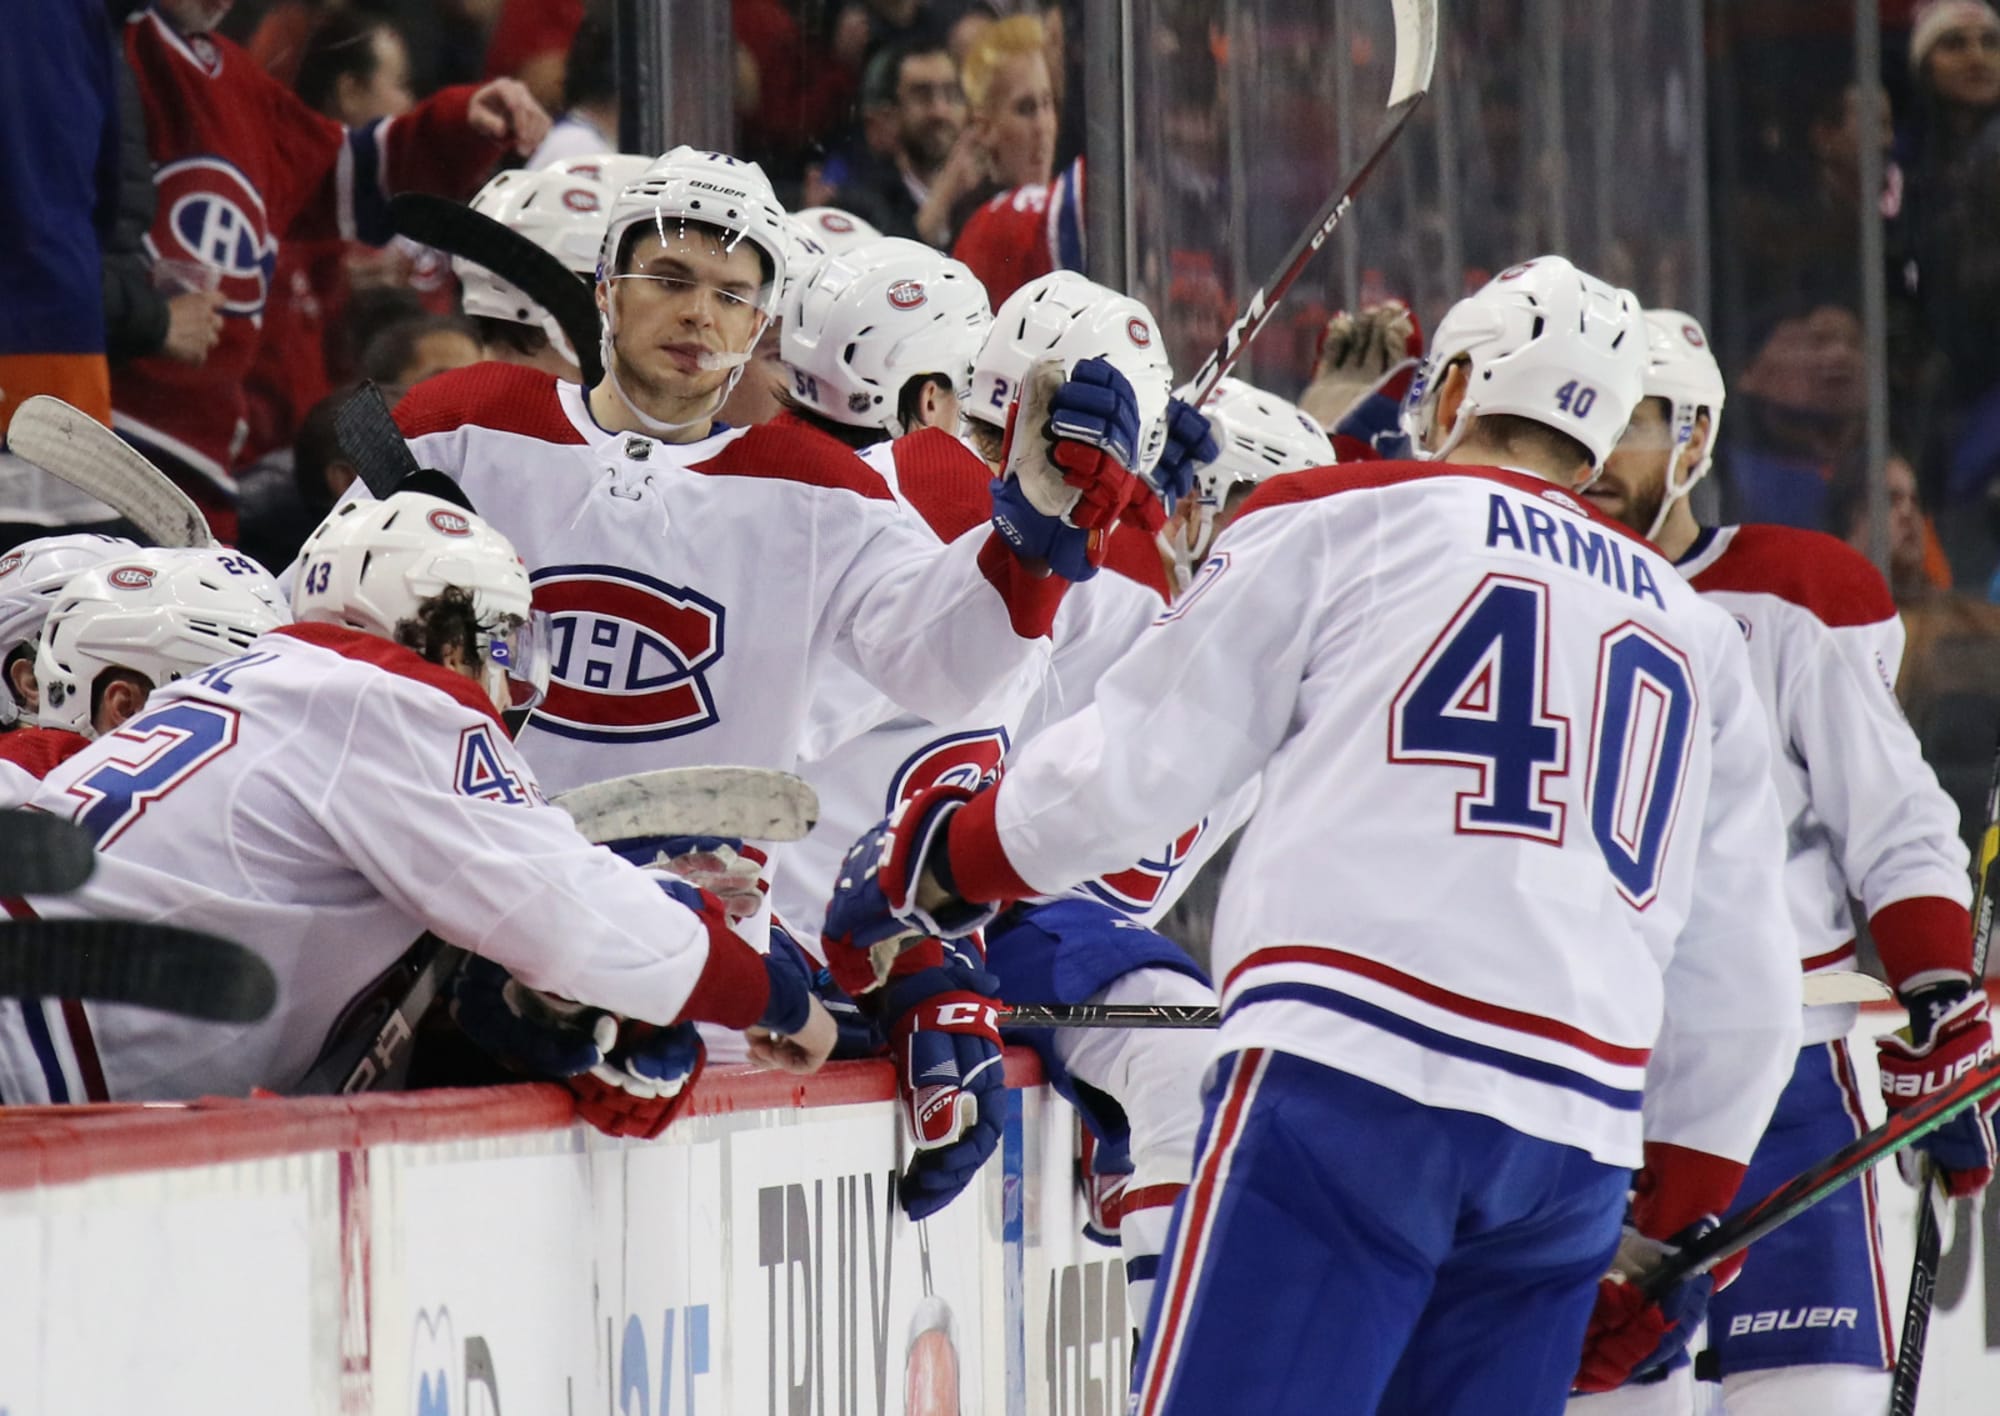 Canadiens NHL Progressing Toward Playoff That Includes Habs